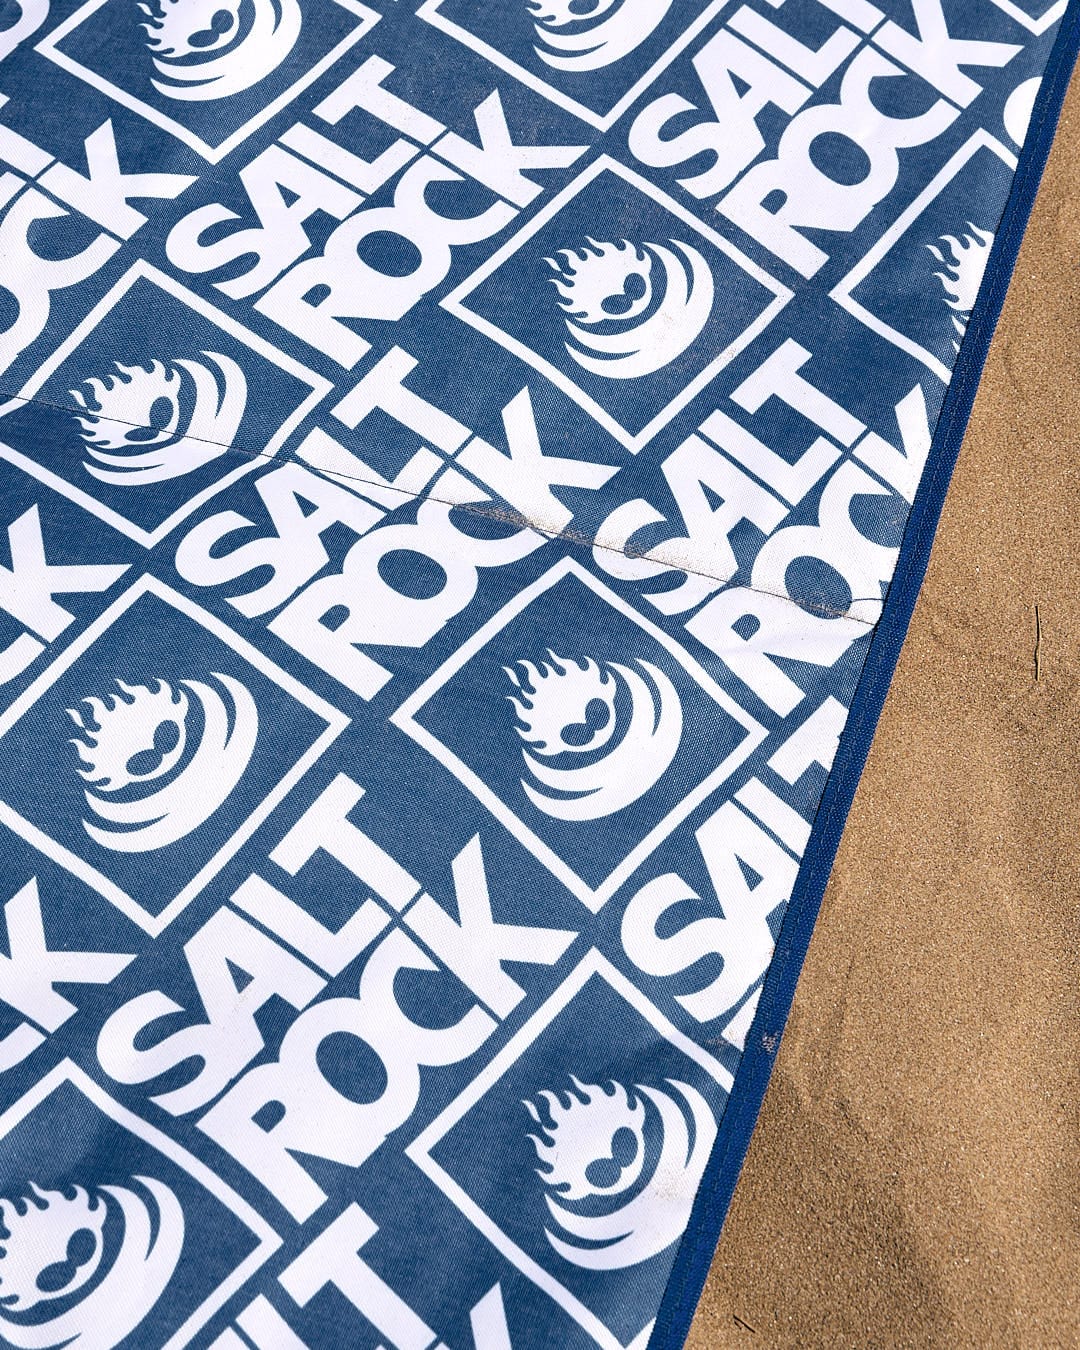 A comfortable Relax - Beach Mat - Blue with the Saltrock logo on it.